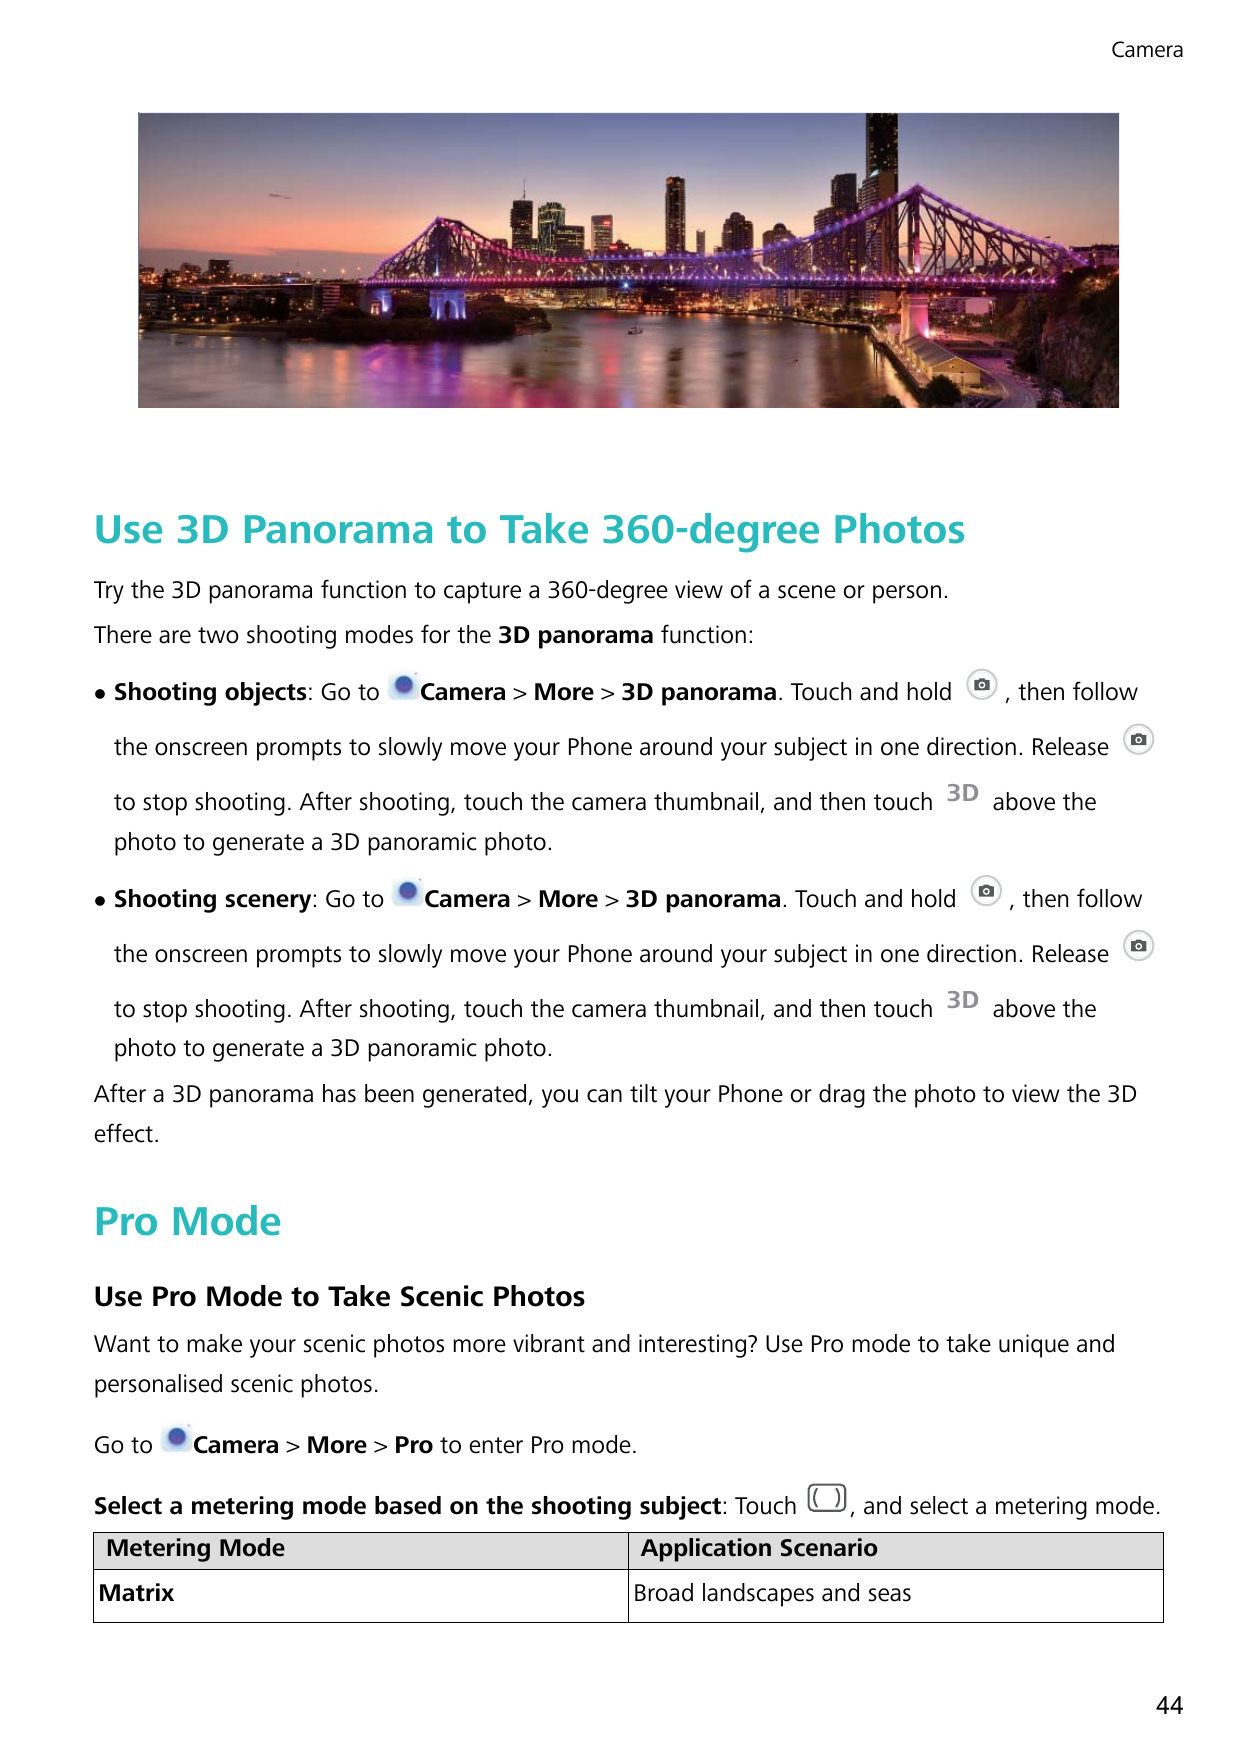 CameraUse 3D Panorama to Take 360-degree PhotosTry the 3D panorama function to capture a 360-degree view of a scene or person.Th